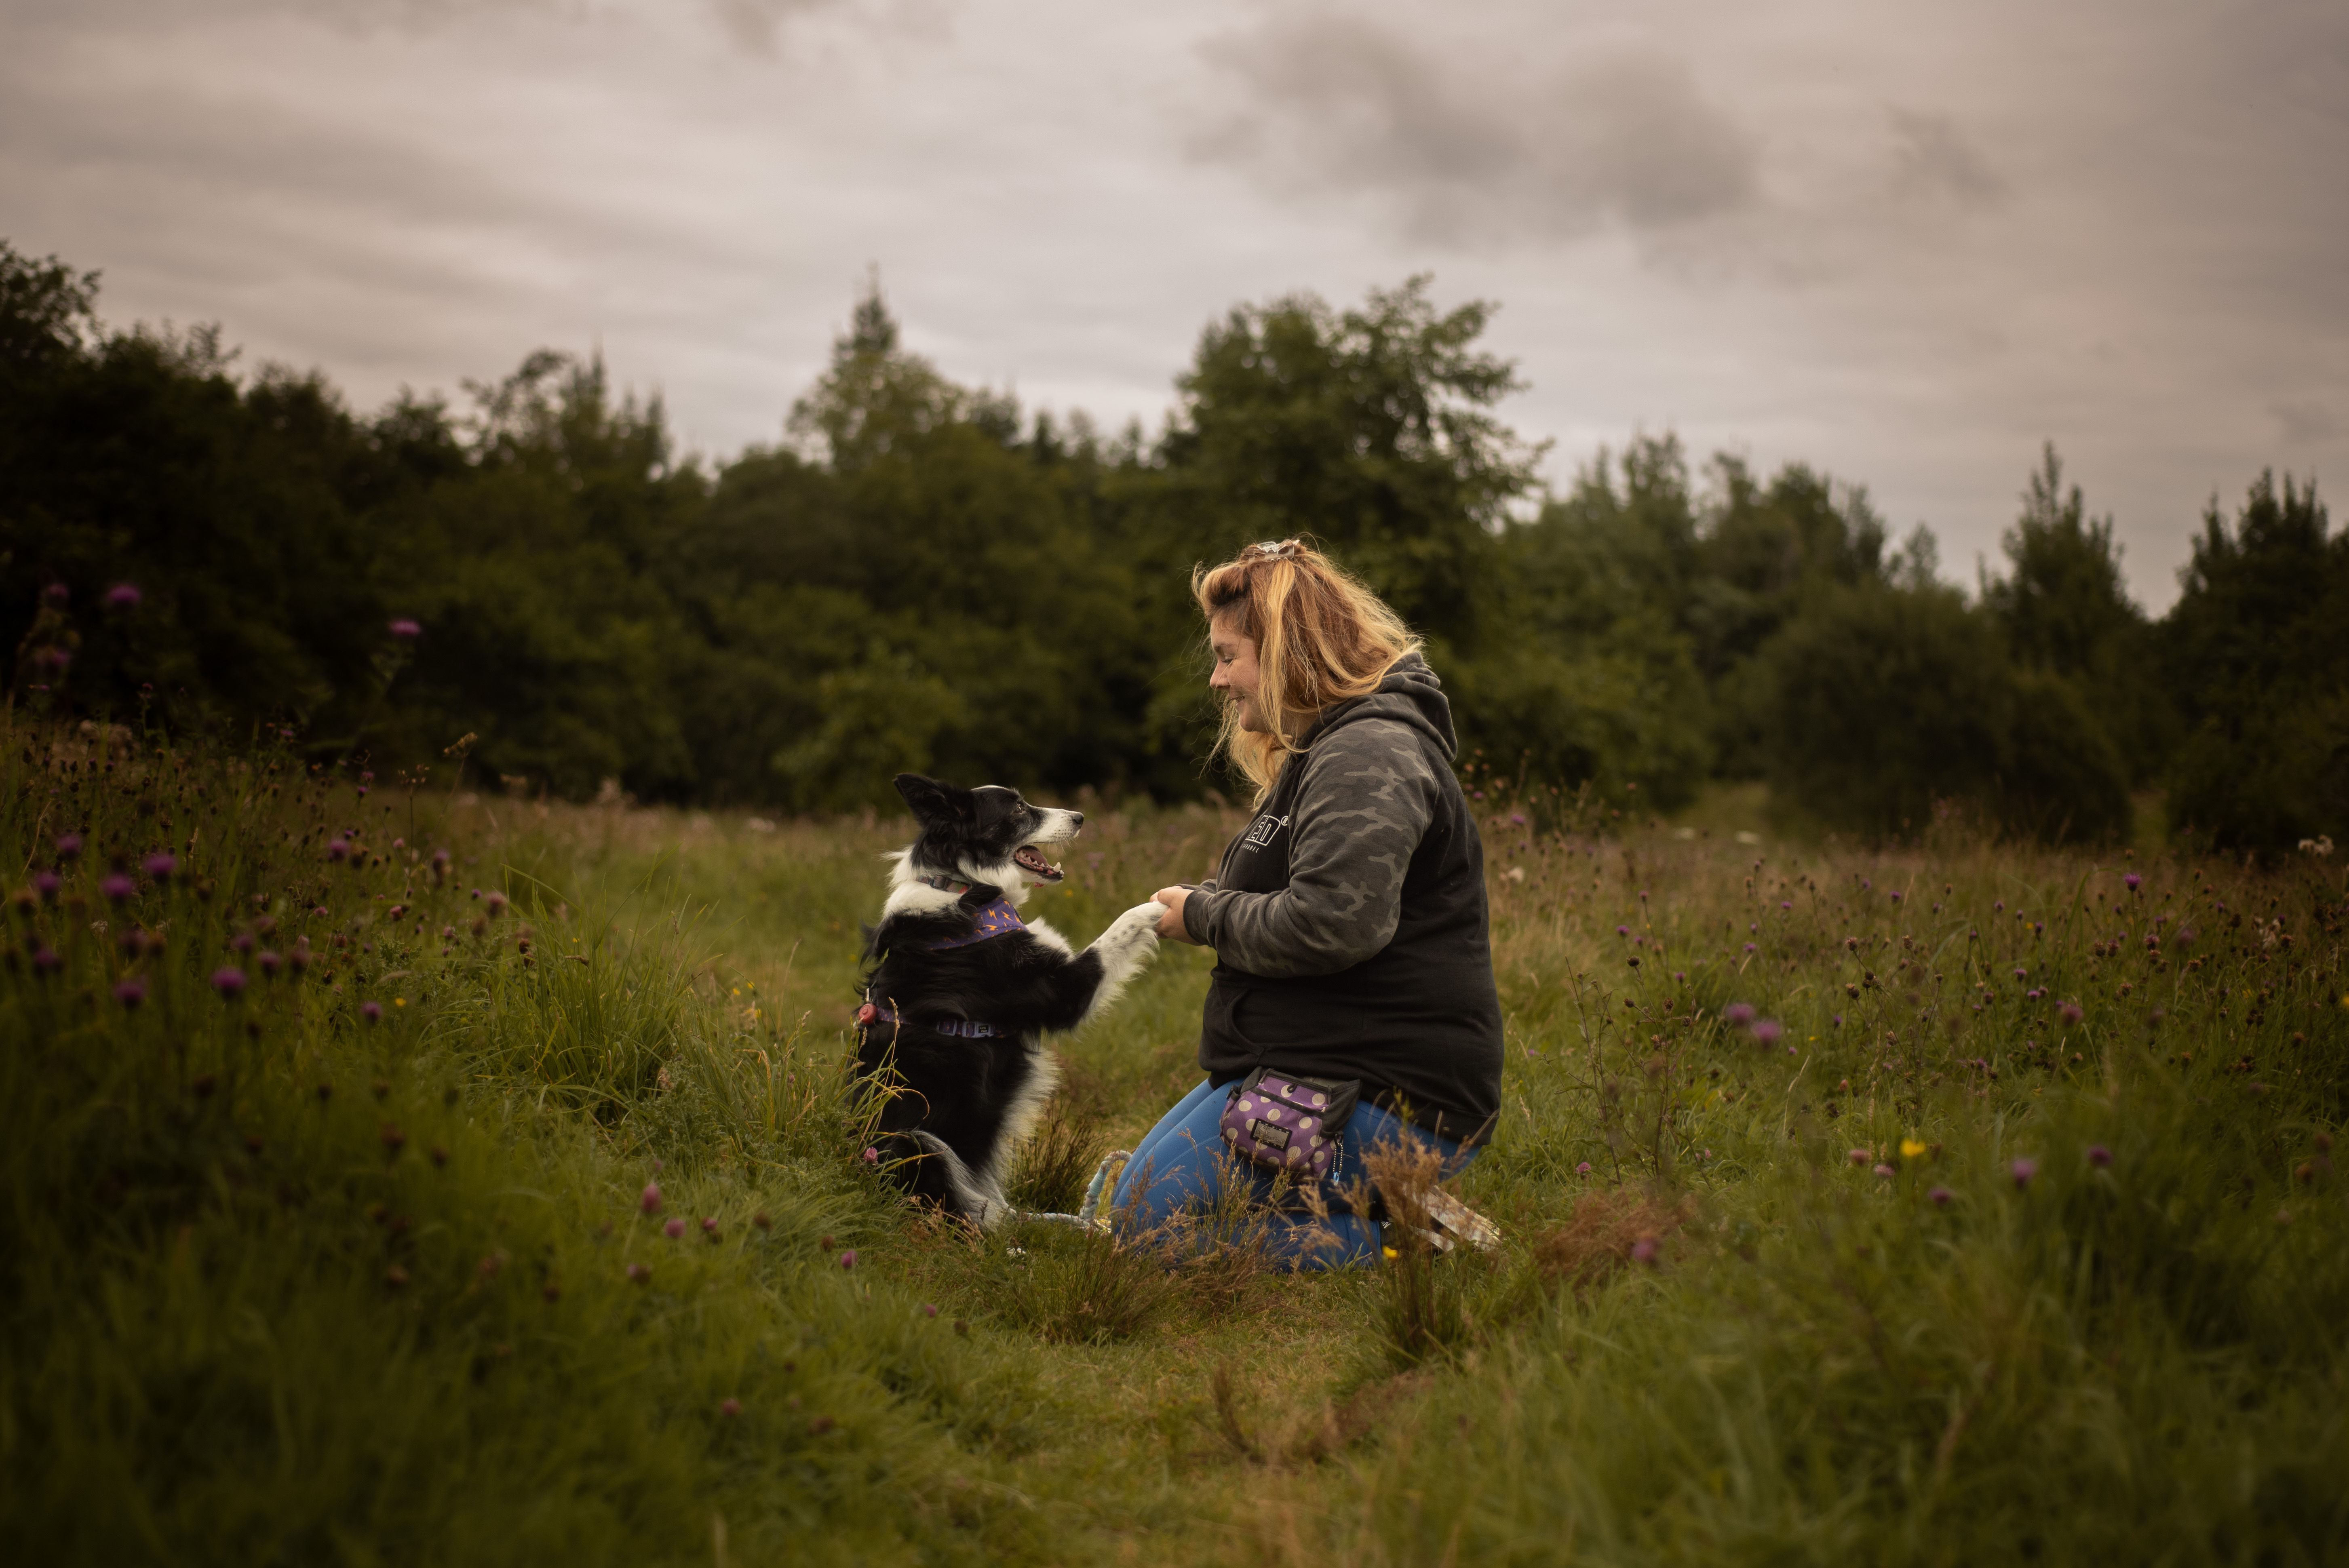 llana and her dog meet in a field.